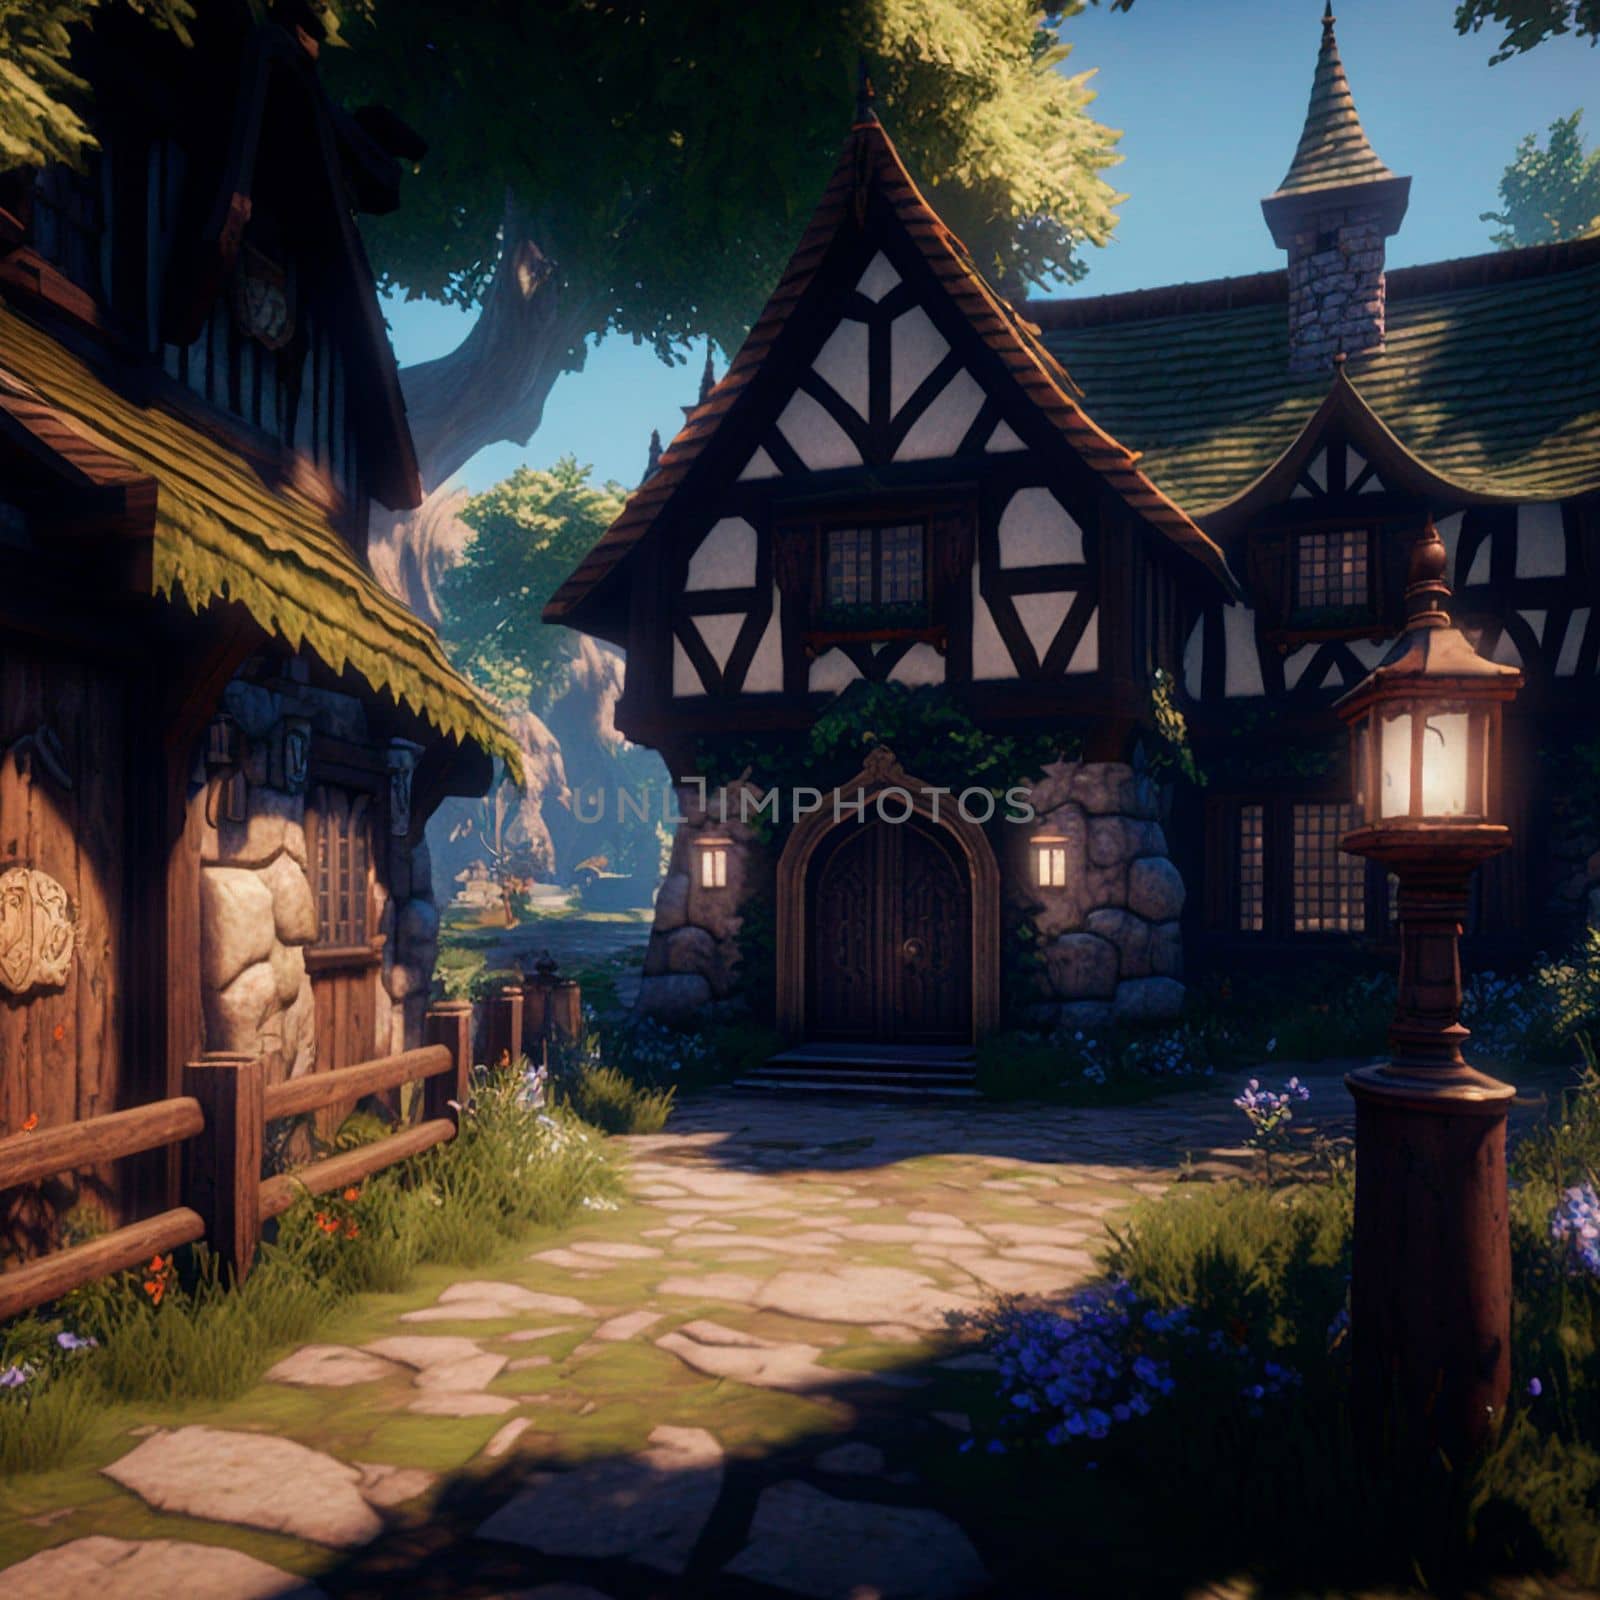 Cozy fairytale town in fantasy style by NeuroSky